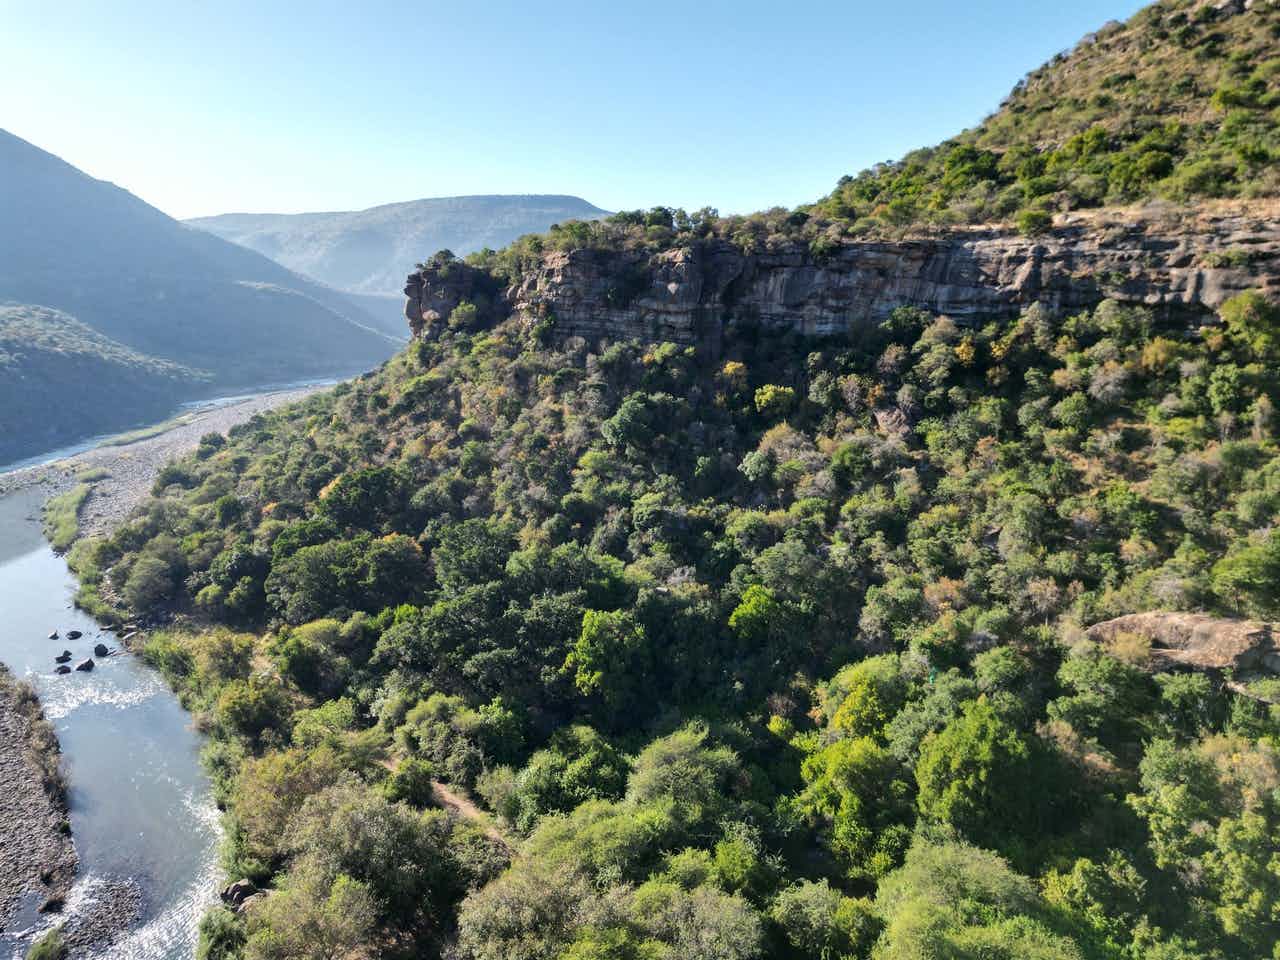 Tugela River, South Africa. Photo: Host/Active Escapes